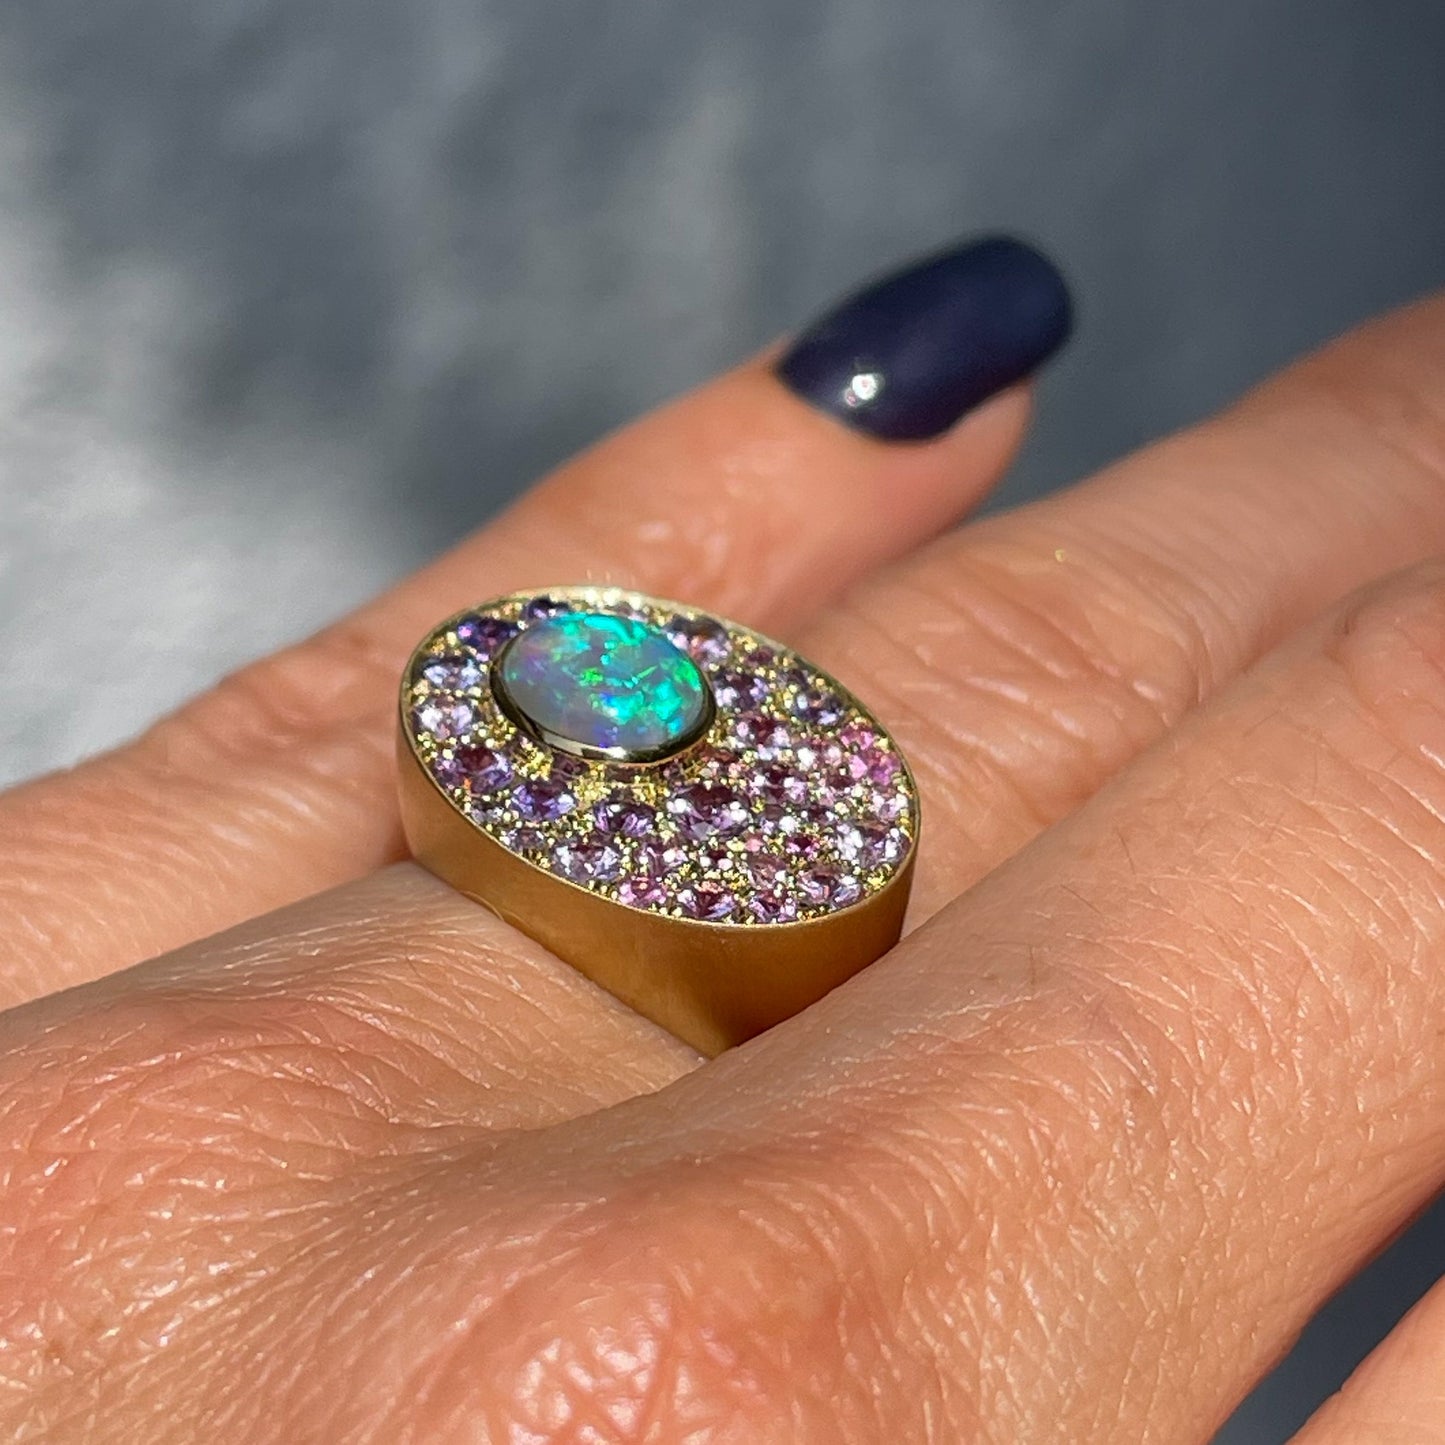 An Australian Opal Ring by NIXIN Jewelry shown in profile worn on the hand. The gold opal ring has a bezel set Crystal Opal and pave sapphires. 